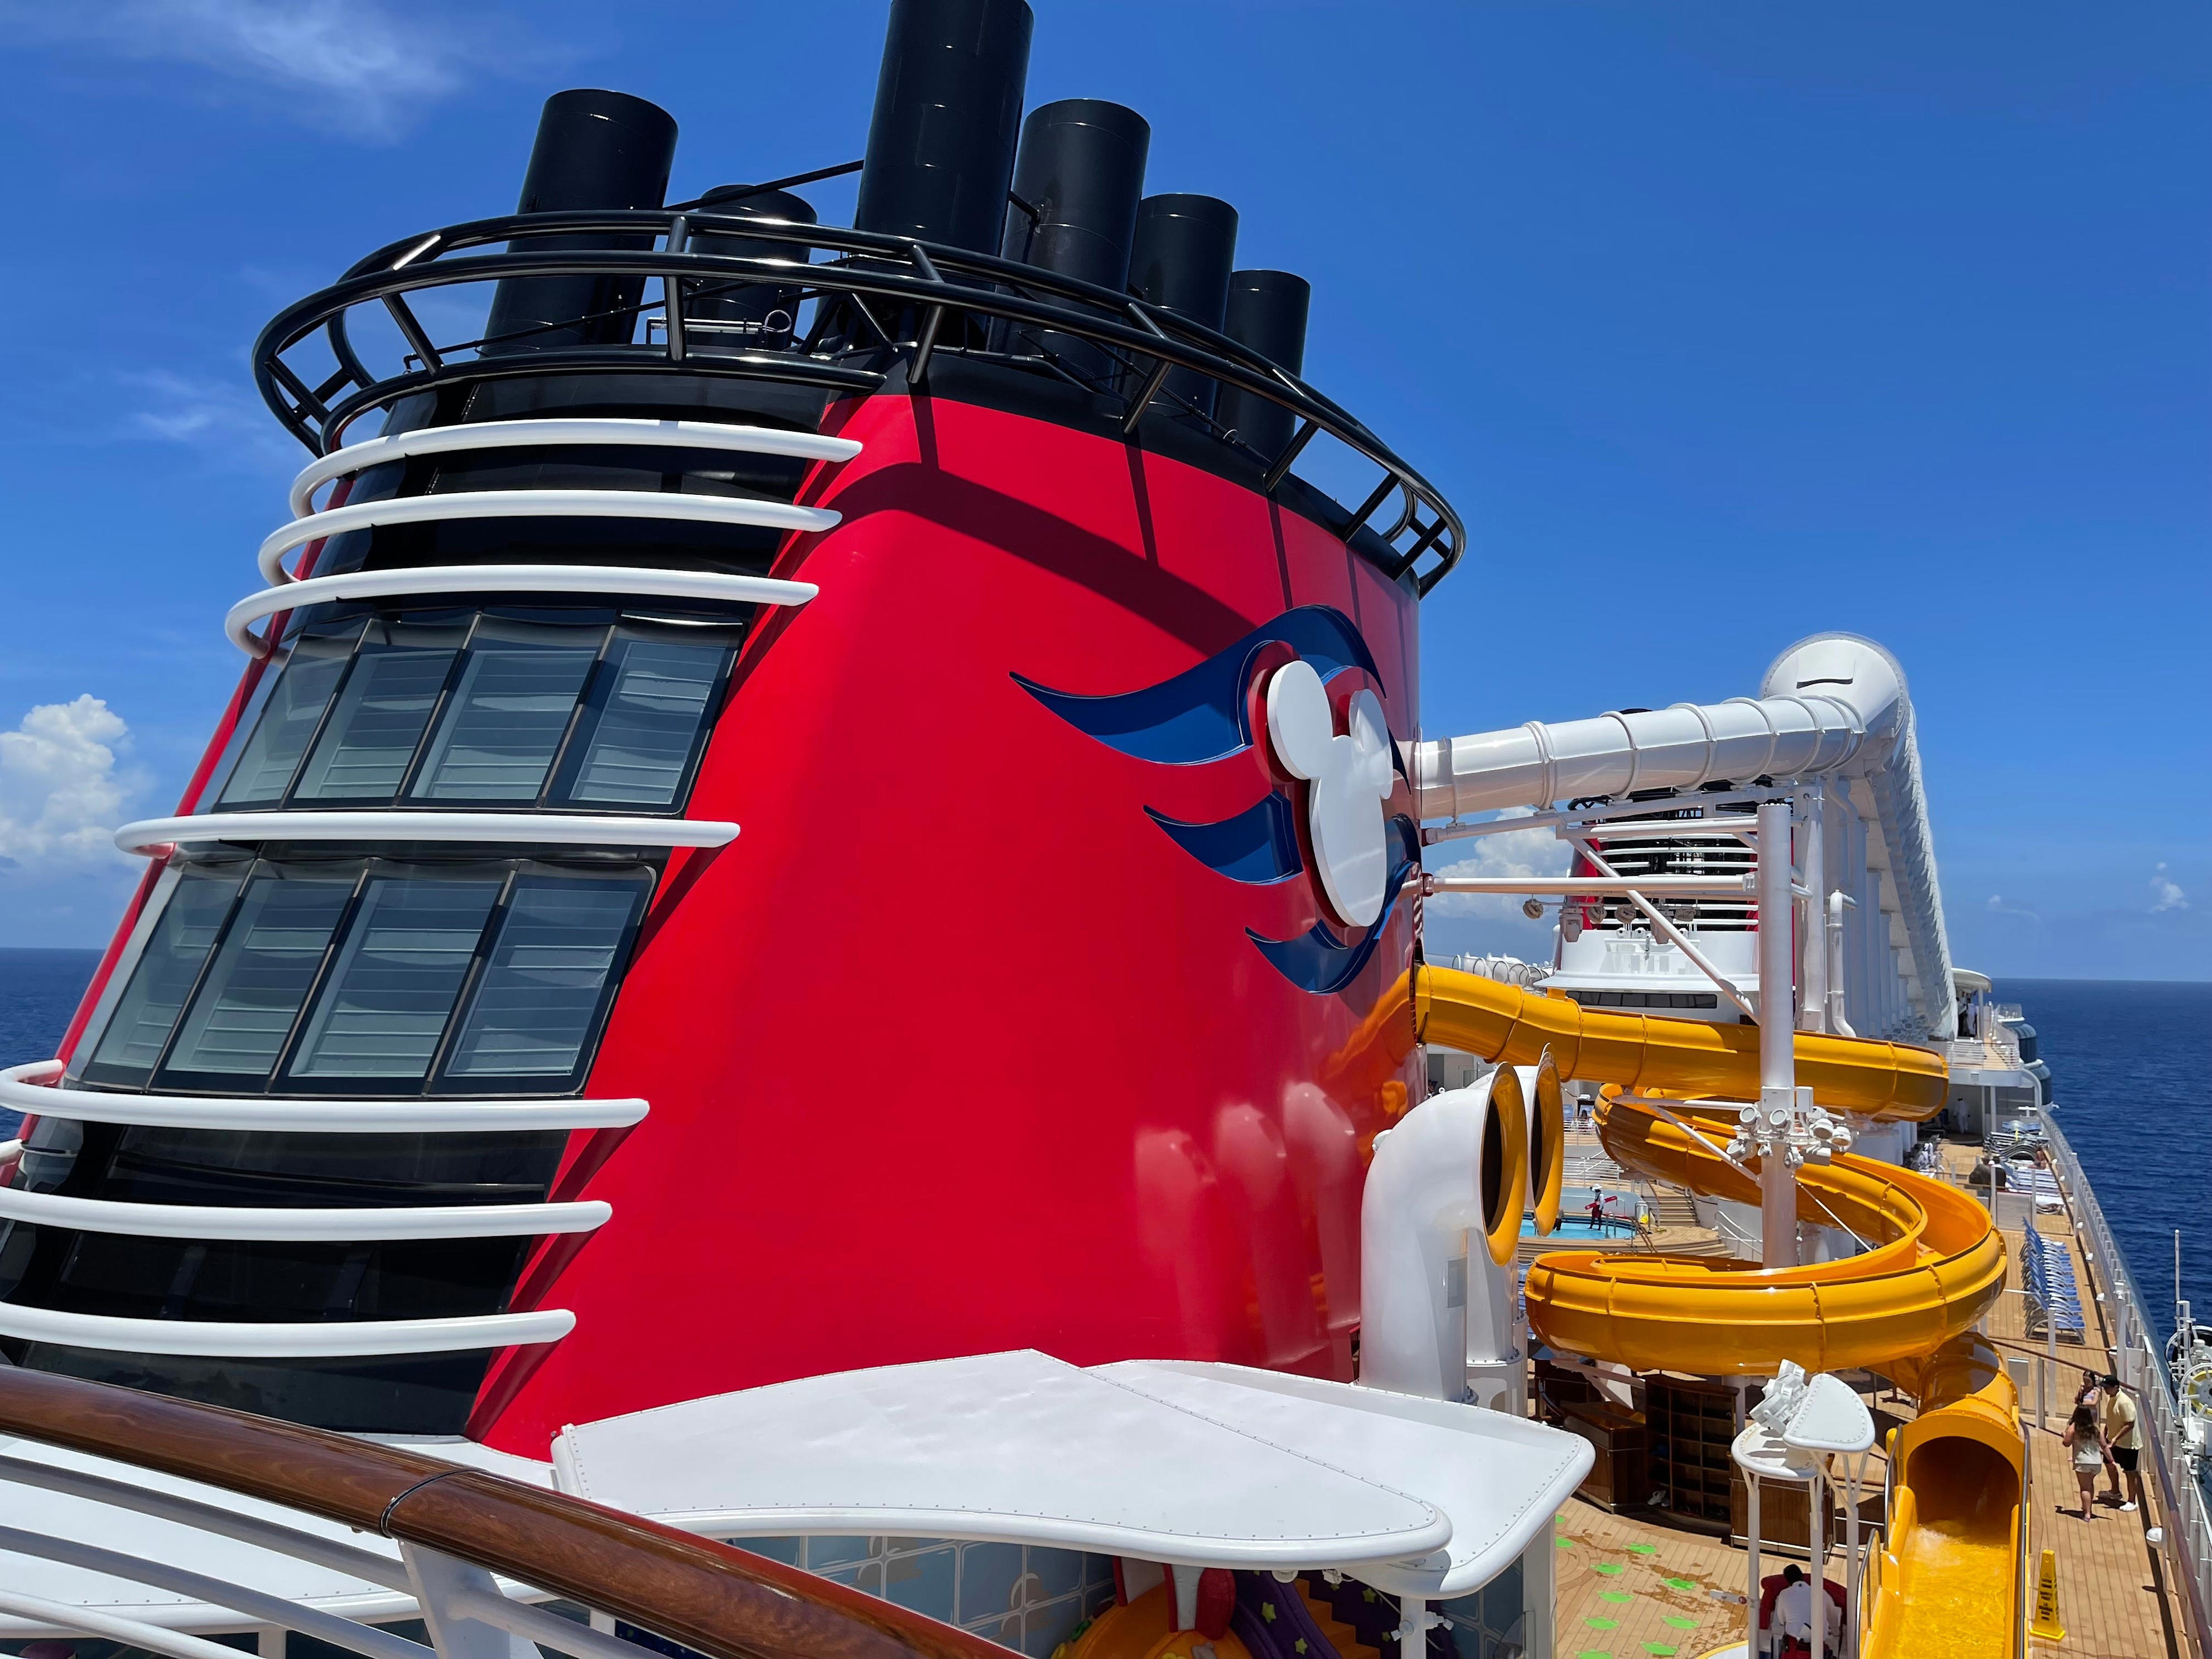 <ul class="summary-list"><li>Out of the 15 cruises I've been on, <a href="https://www.businessinsider.com/disney-world-vs-disney-cruise-which-is-worth-it-families-2023-10">Disney Cruise Line</a> is my favorite company to travel with.</li><li>Disney cruises offer the perfect getaway for adults without children.</li><li>From animation classes and private islands to Broadway-style shows, I never run out of things to do.</li></ul><p>After taking over 15 cruises on <a href="https://www.businessinsider.com/best-cruise-lines-from-frequent-cruiser-disney-royal-caribbean-2024-5">most of the major lines</a>, one stands out as my favorite company to travel with — Disney Cruise Line. Disney cruises combine what I love about the theme parks with relaxation and stellar dining, making them the perfect getaway.</p><p>I also love that Disney continues to invest in its cruise line. For example, the company's newest ship, <a href="https://disneycruise.disney.go.com/ships/treasure/">Disney Treasure</a>, plans to embark on its maiden voyage in December.</p><p>And next year, <a href="https://thewaltdisneycompany.com/disney-destiny-cruise-ship-heroes-villains/">Disney Destiny</a> and <a href="https://www.forbes.com/sites/megandubois/2024/06/26/disney-cruise-line-reveals-details-about-asia-based-cruise-ship-launching-in-2025/">Disney Adventure</a> will set sail for the first time. The company also invested <a href="https://www.forbes.com/sites/megandubois/2024/06/14/disney-cruise-lines-new-island-destination-welcomes-first-cruise-ships/">between $250 million and $400 million</a> in a new island in the Bahamas, which I was lucky enough to visit. </p><p>Although some may think of Disney Cruise Line as a company that caters to kids, I've had an incredible time on <a href="https://www.businessinsider.com/disney-world-grand-floridian-resort-worth-it-adults-review-2024">adults-only vacations</a> with my sister, mother, friends, and husband. Here's why I think Disney cruises are the perfect choice for travelers without children.</p><div class="read-original">Read the original article on <a href="https://www.businessinsider.com/disney-cruises-without-kids-perfect-for-adults-2024-7">Business Insider</a></div>